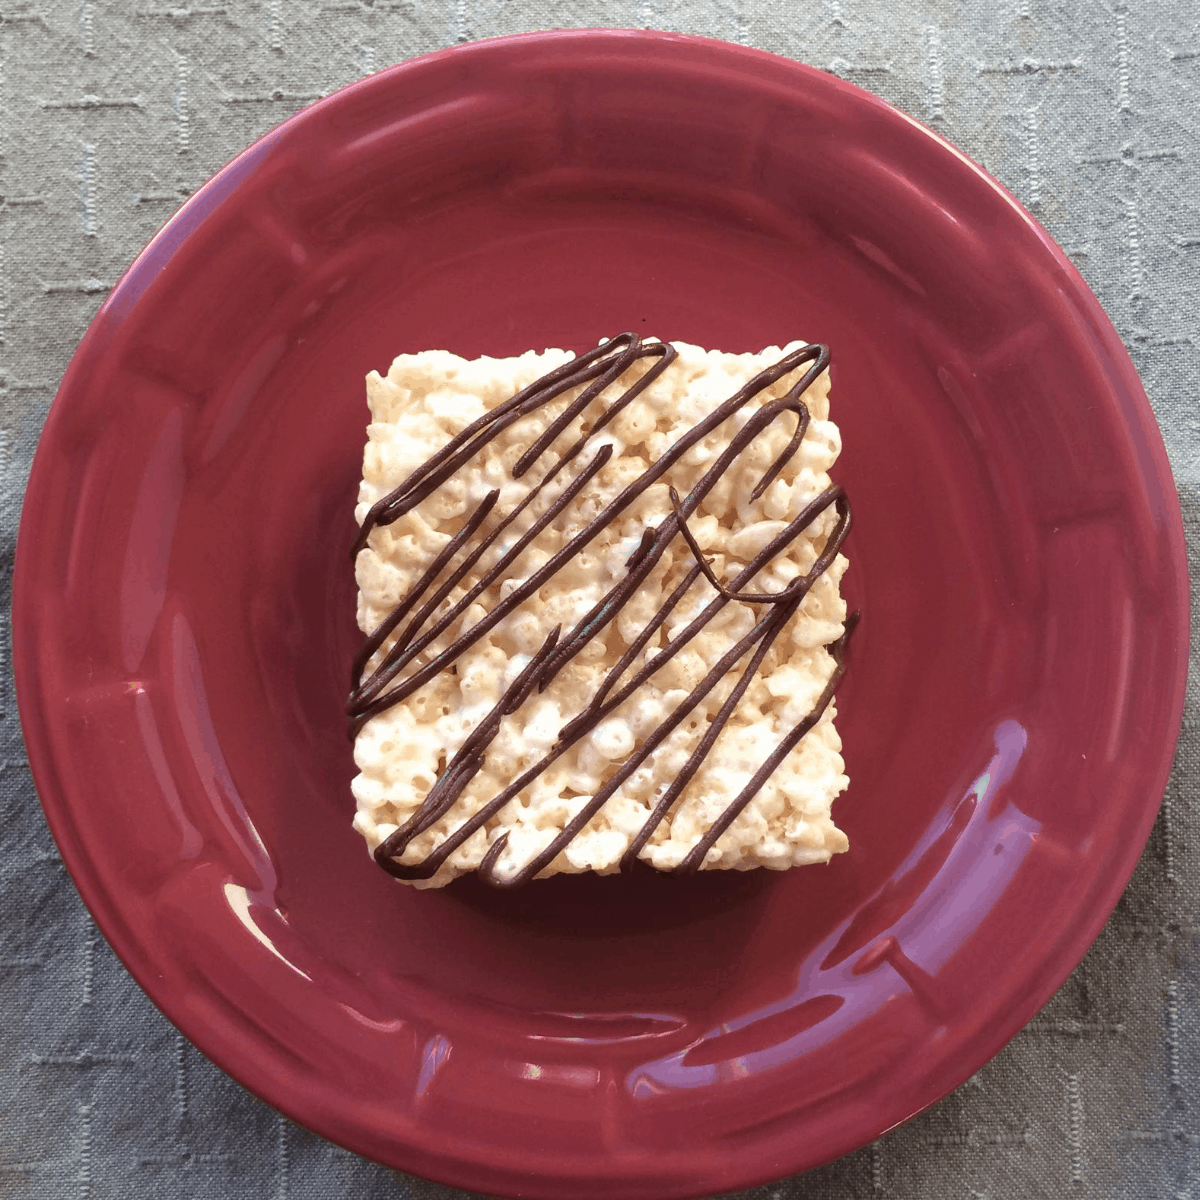 A gluten and dairy free rice krispie treat drizzled with chocolate on a plate.